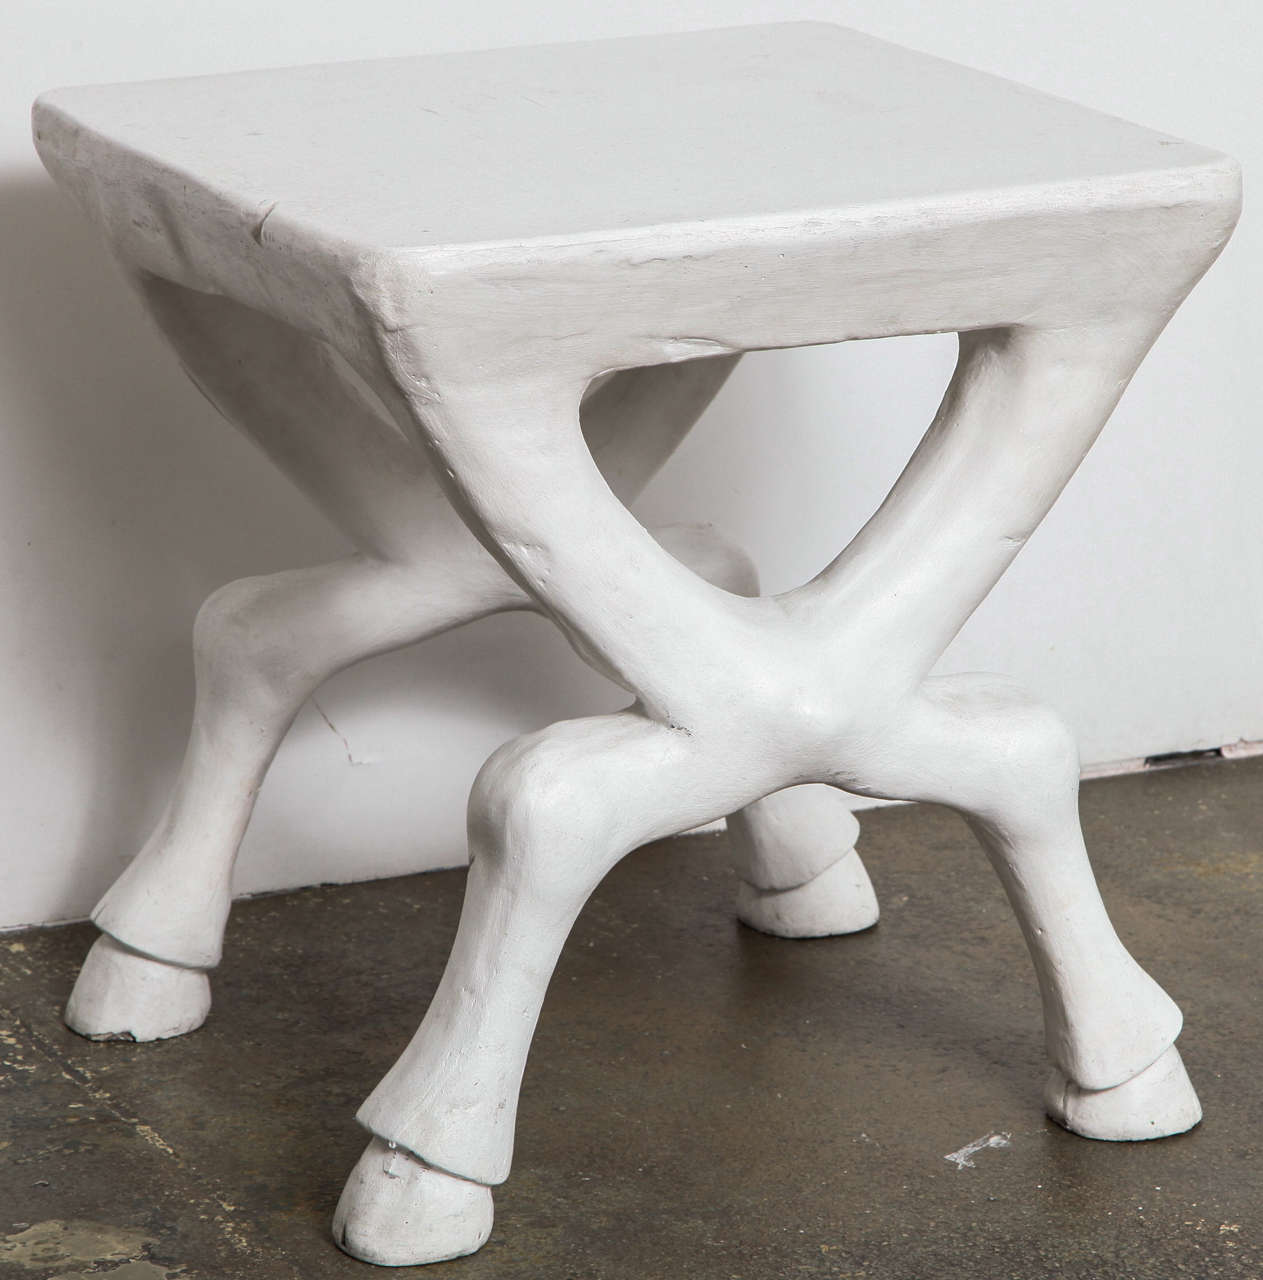 One of the most famous of Dickinson's tables, painted plaster with crossed base form ending in hooves. Made by John Dickinson Studio.